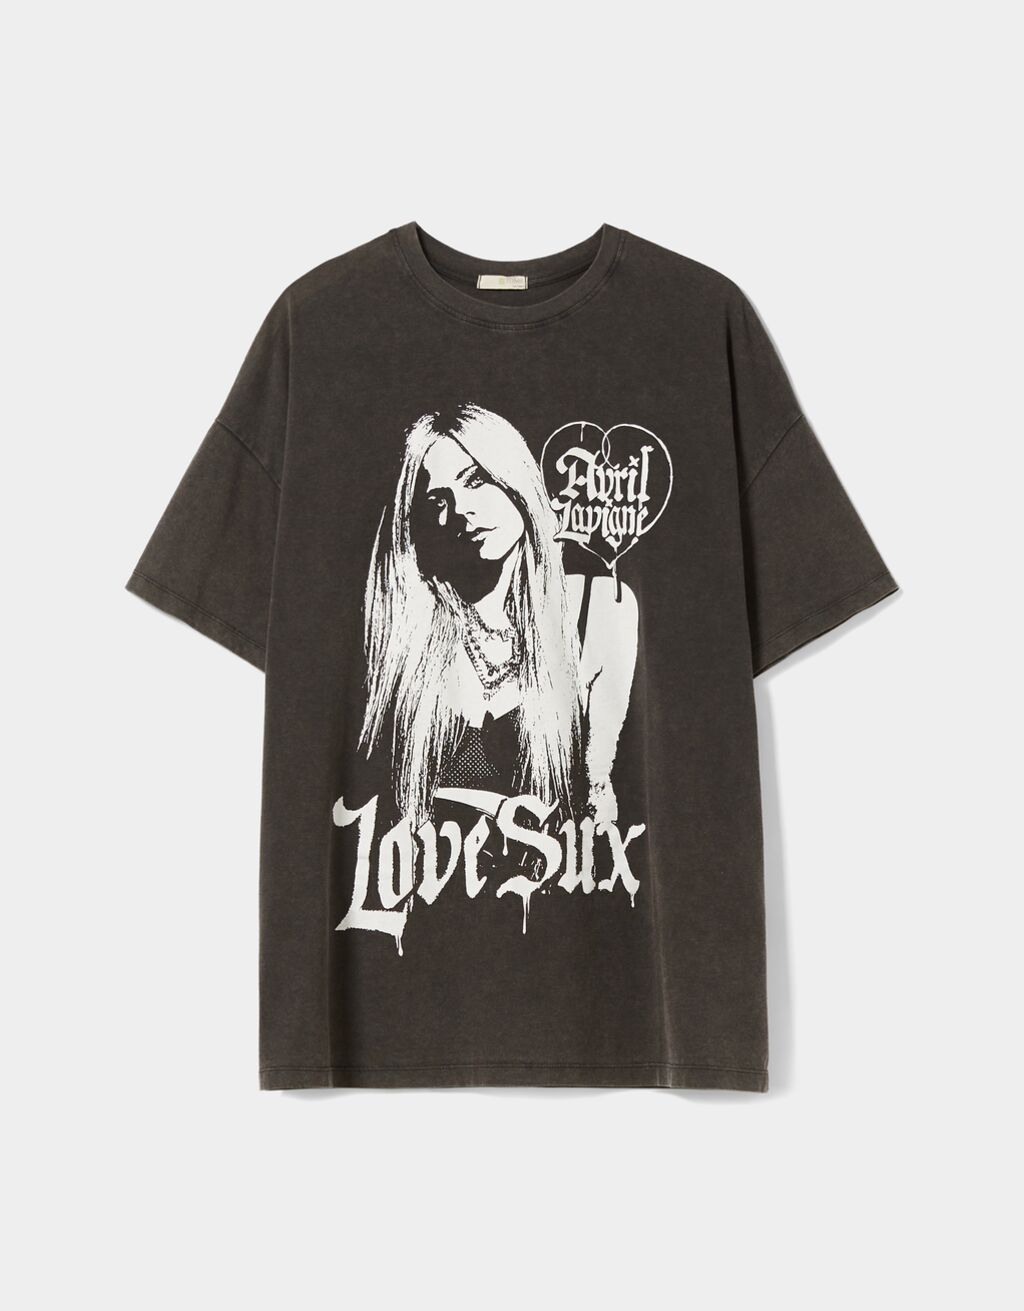 Short sleeve T-shirt with an Avril Lavigne print